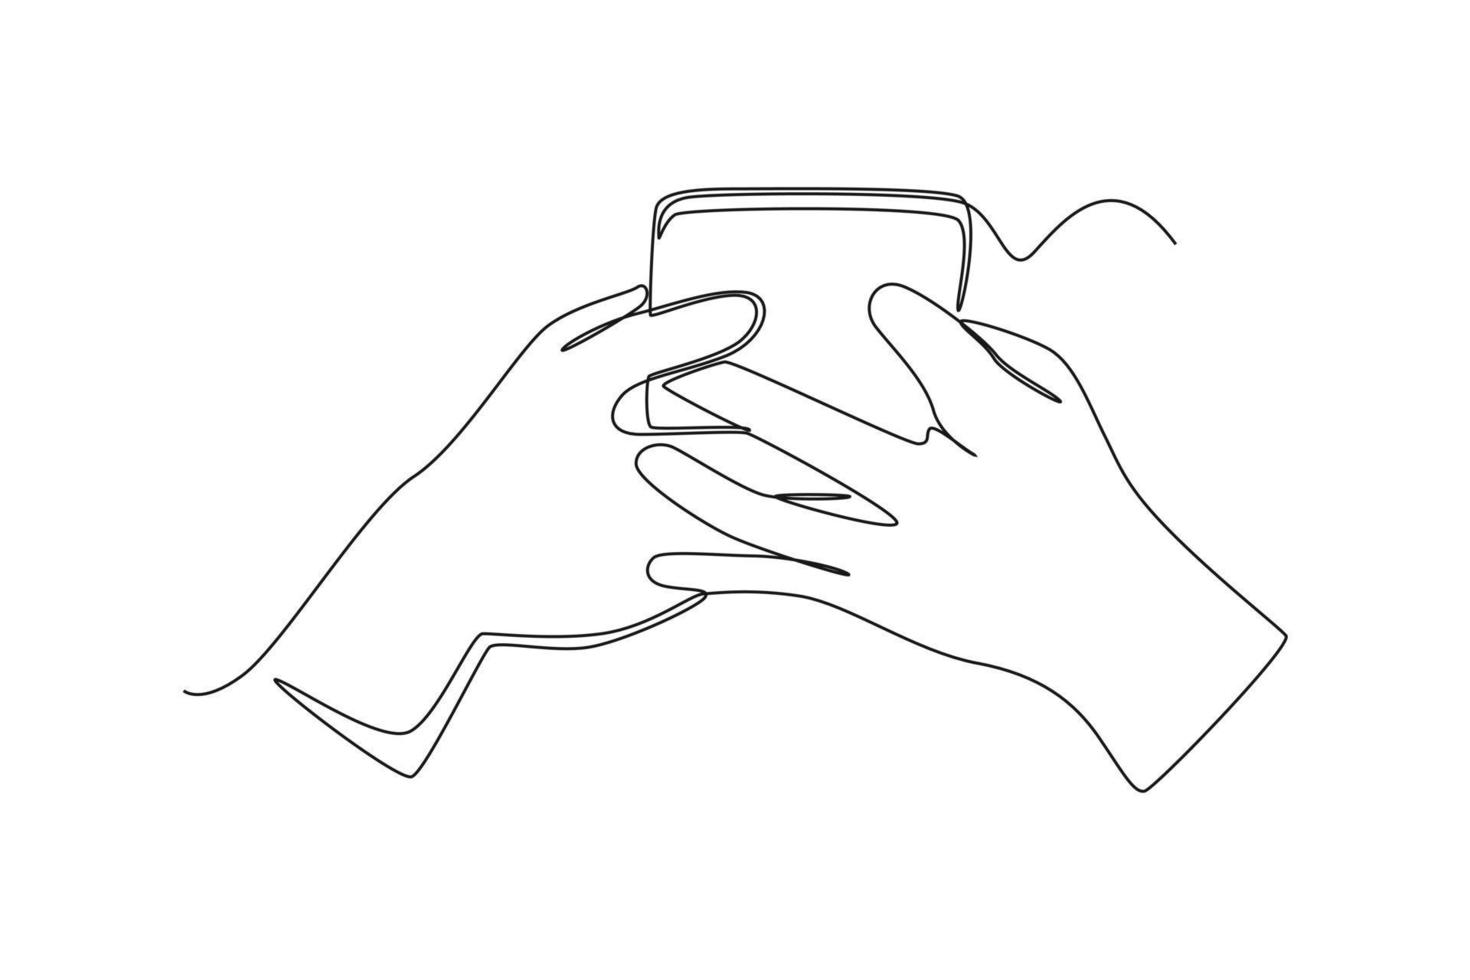 Single one line drawing hands holding smartphone. Social media concept. Continuous line draw design graphic vector illustration.